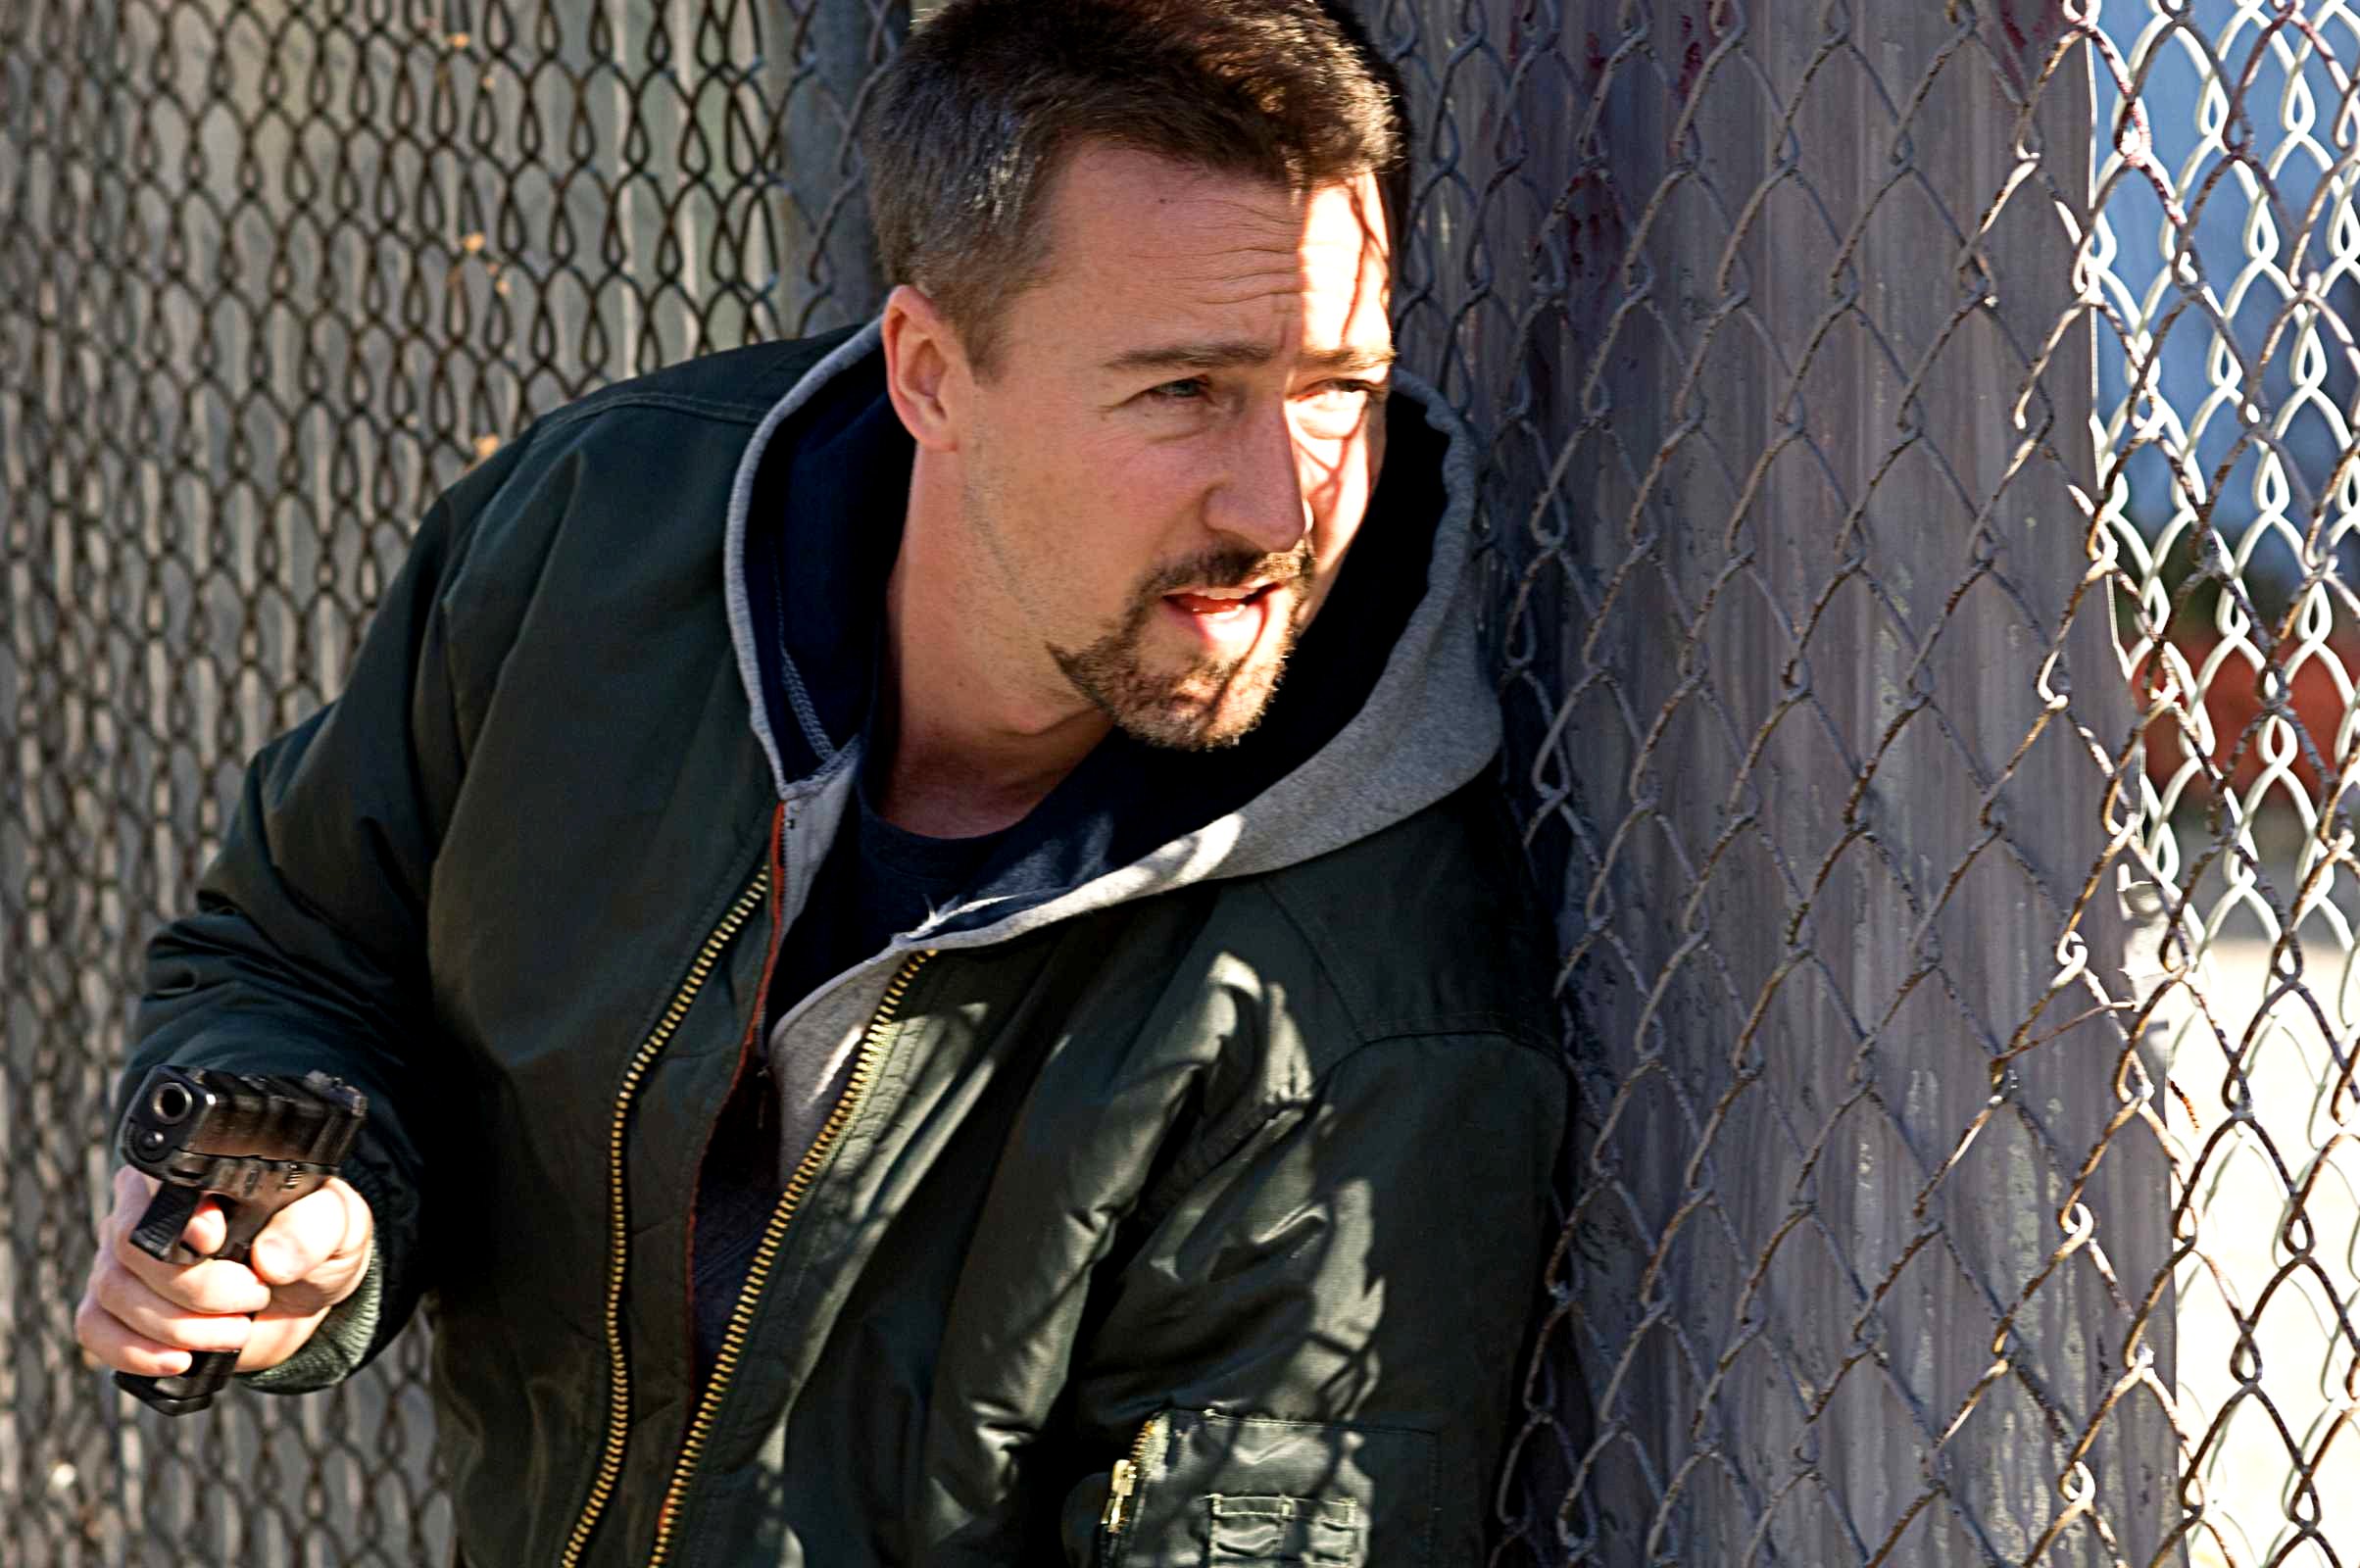 Edward Norton stars as Ray Tierney in New Line Cinema's Pride and Glory (2008). Photo credit by Glen Wilson.